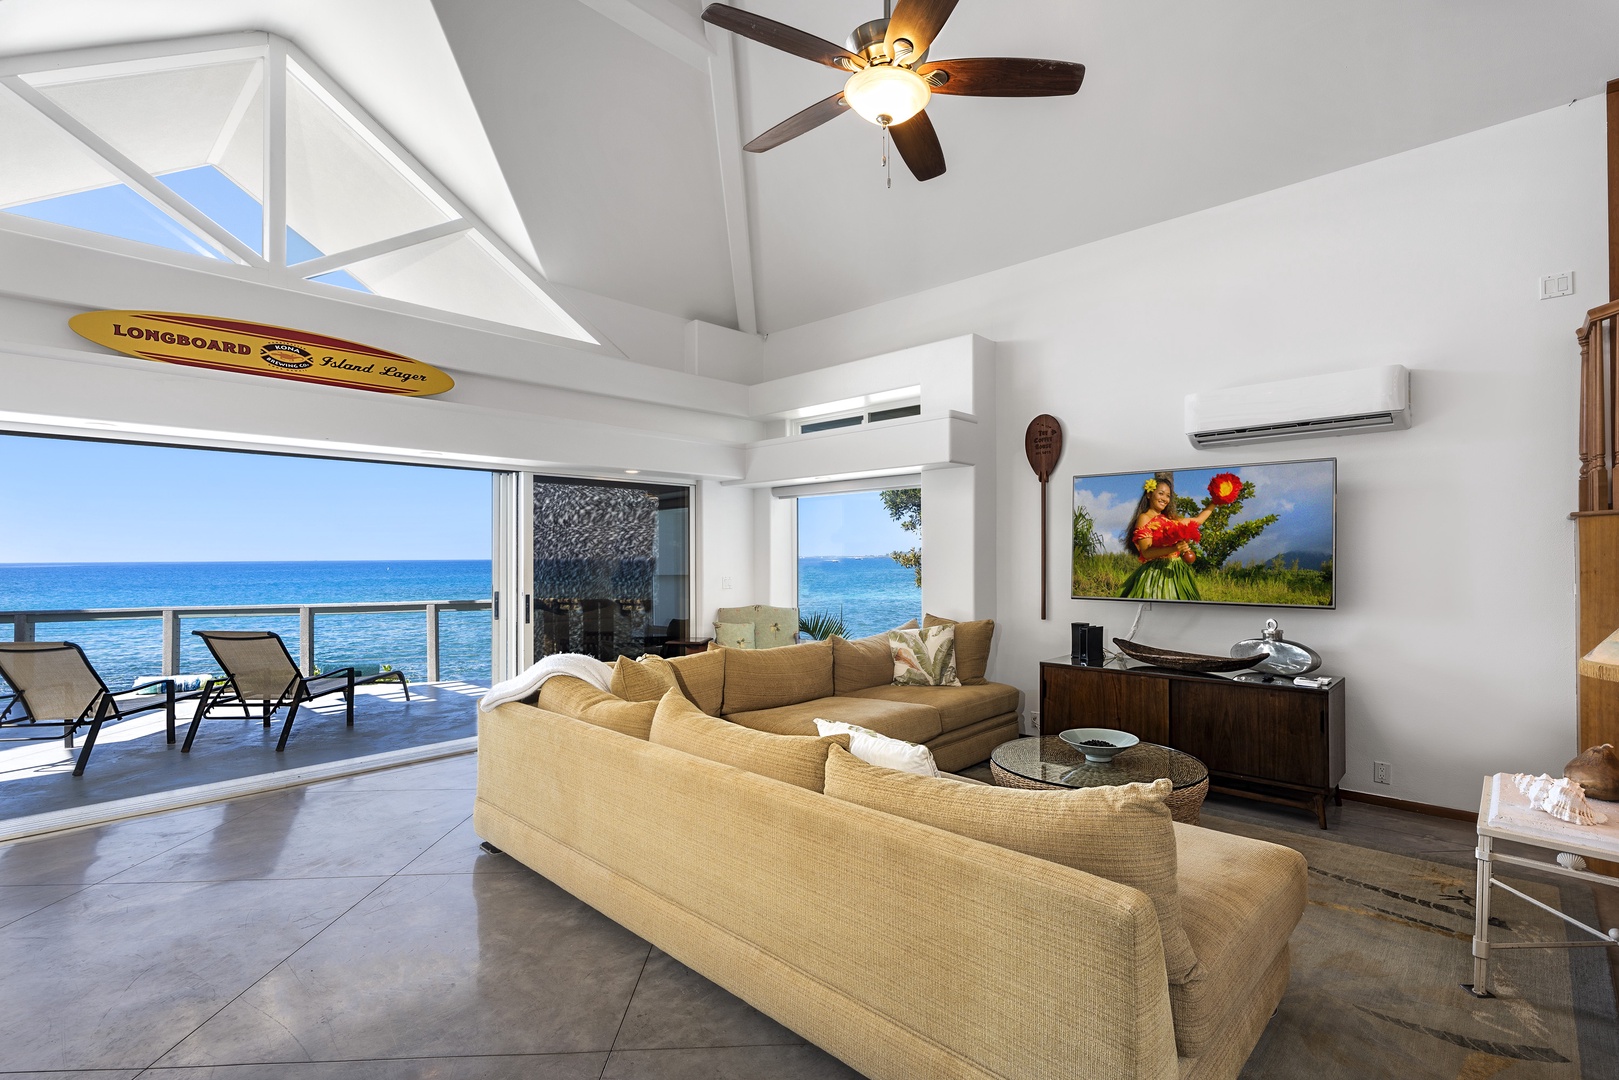 Kailua-Kona Vacation Rentals, Hale Kope Kai - Large seating area for your viewing pleasure